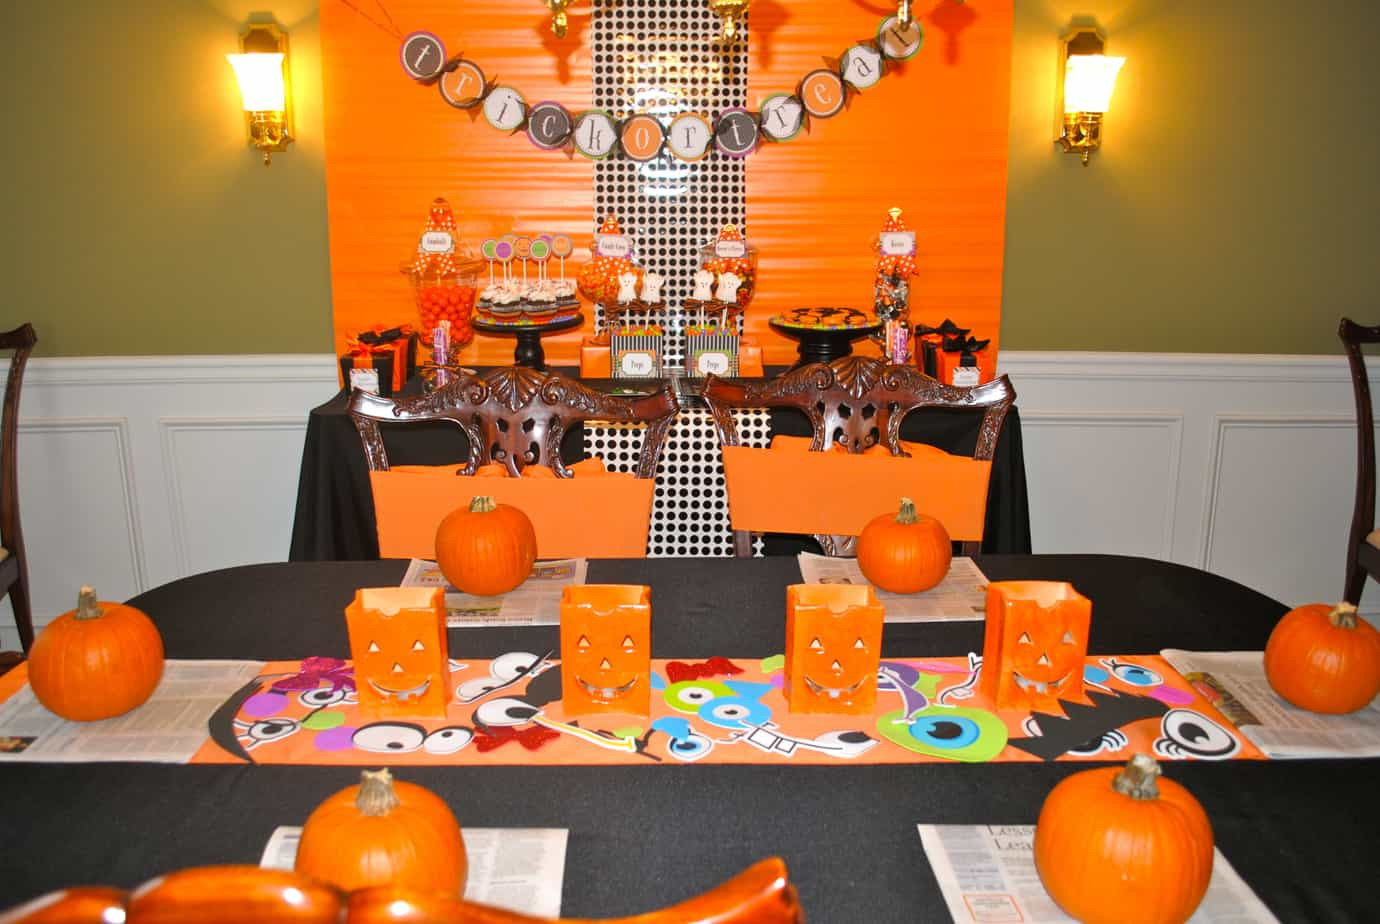 Halloween Bday Party Ideas
 Halloween Party Ideas For Kids 2019 With Daily